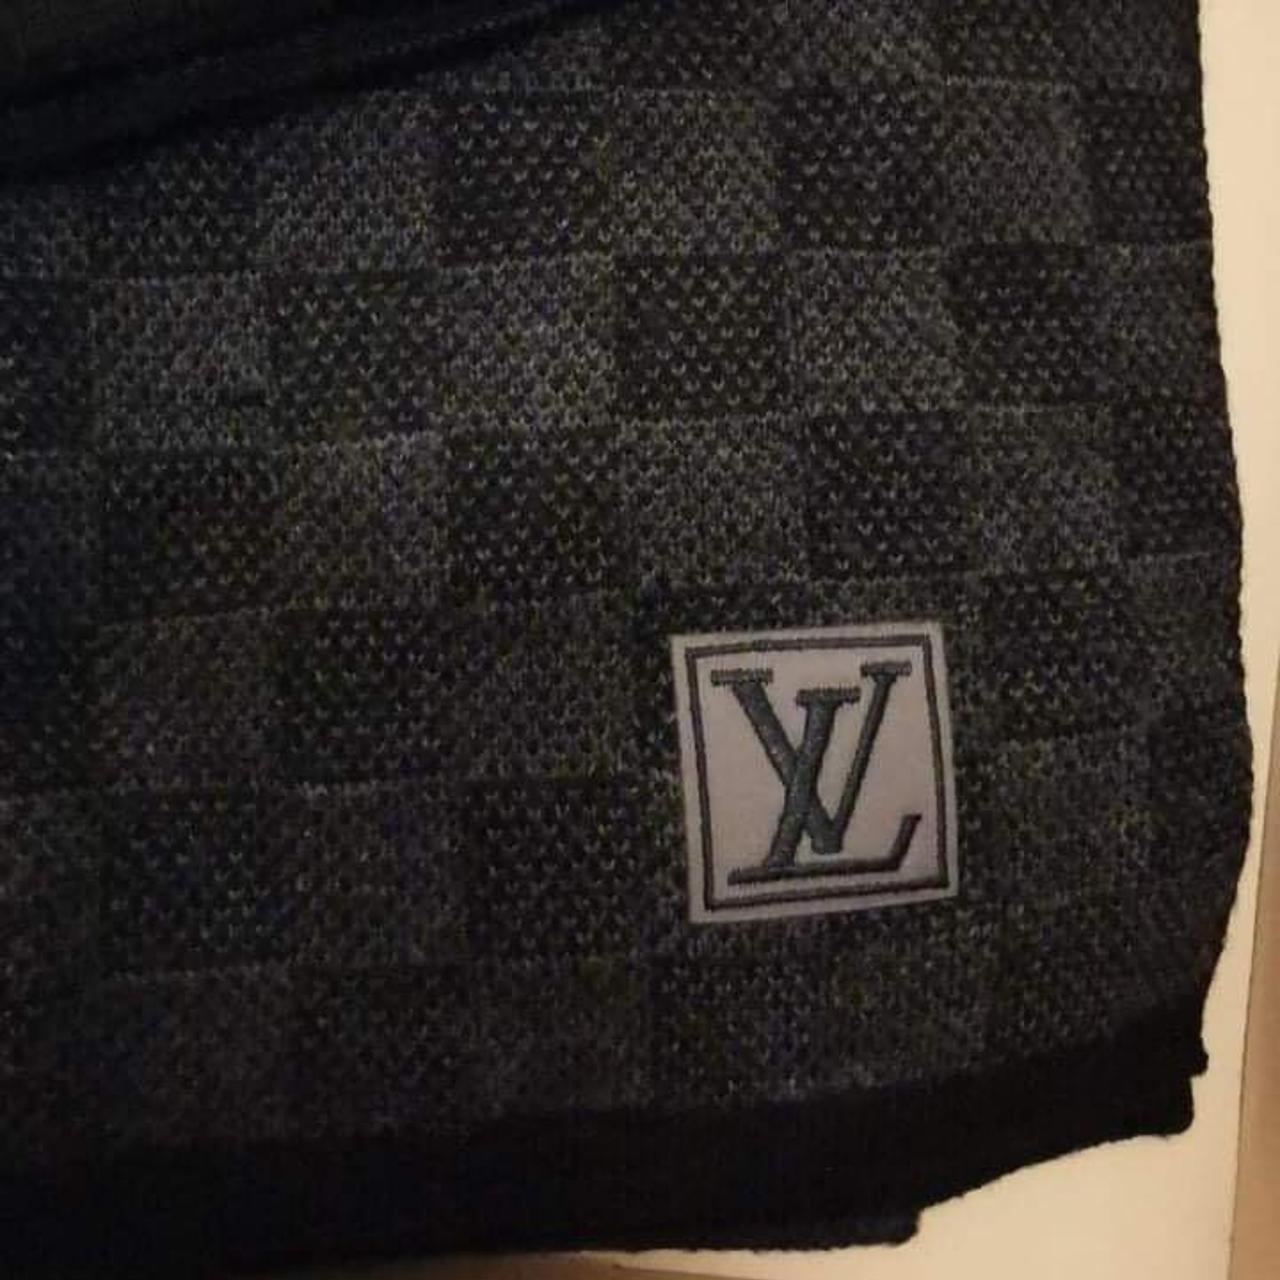 Get your LV hat and scarf sets ready for winter - Depop